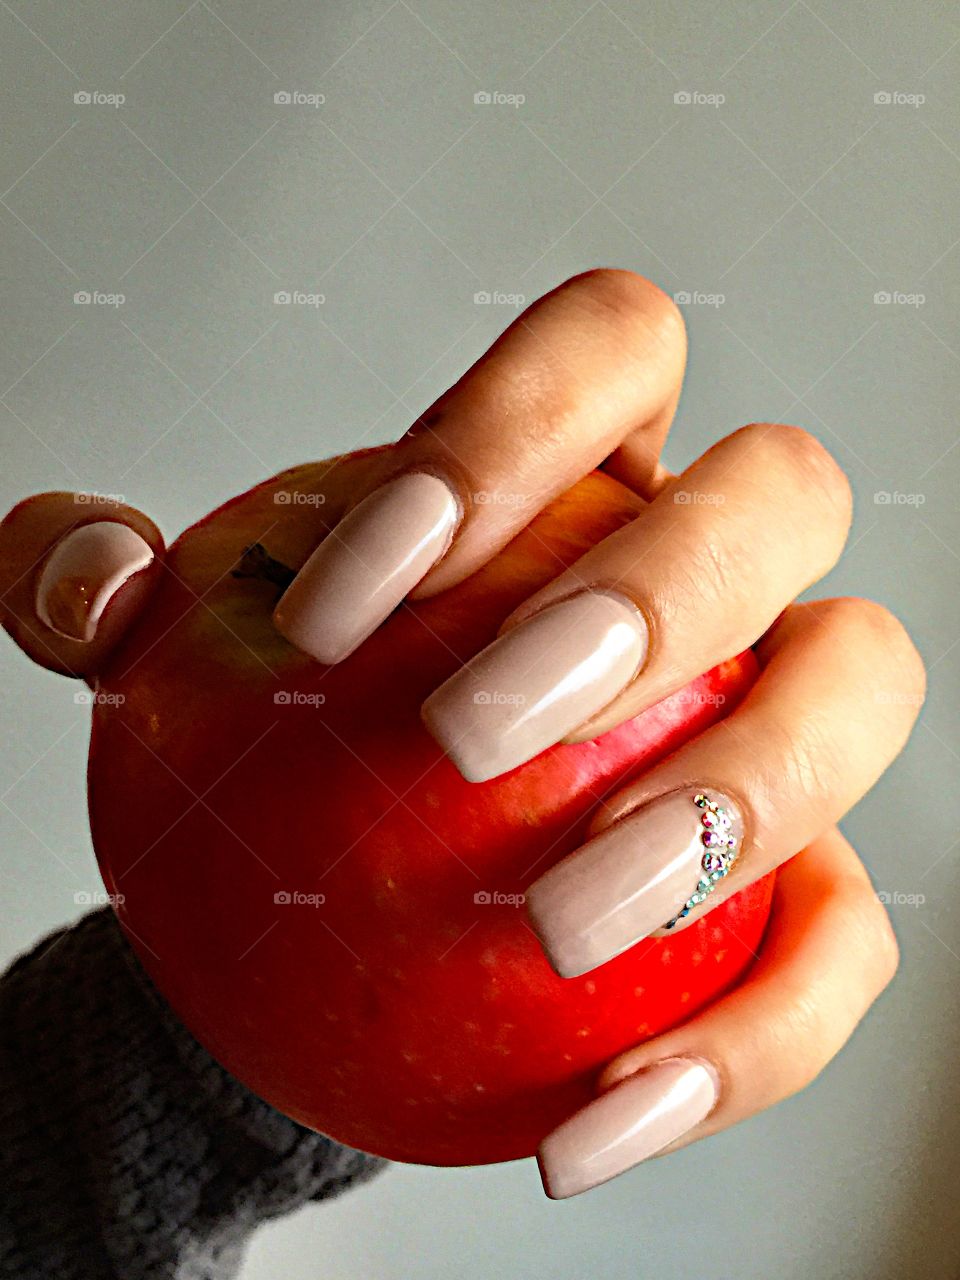 Long beige nails and the hand holding a red apple! 